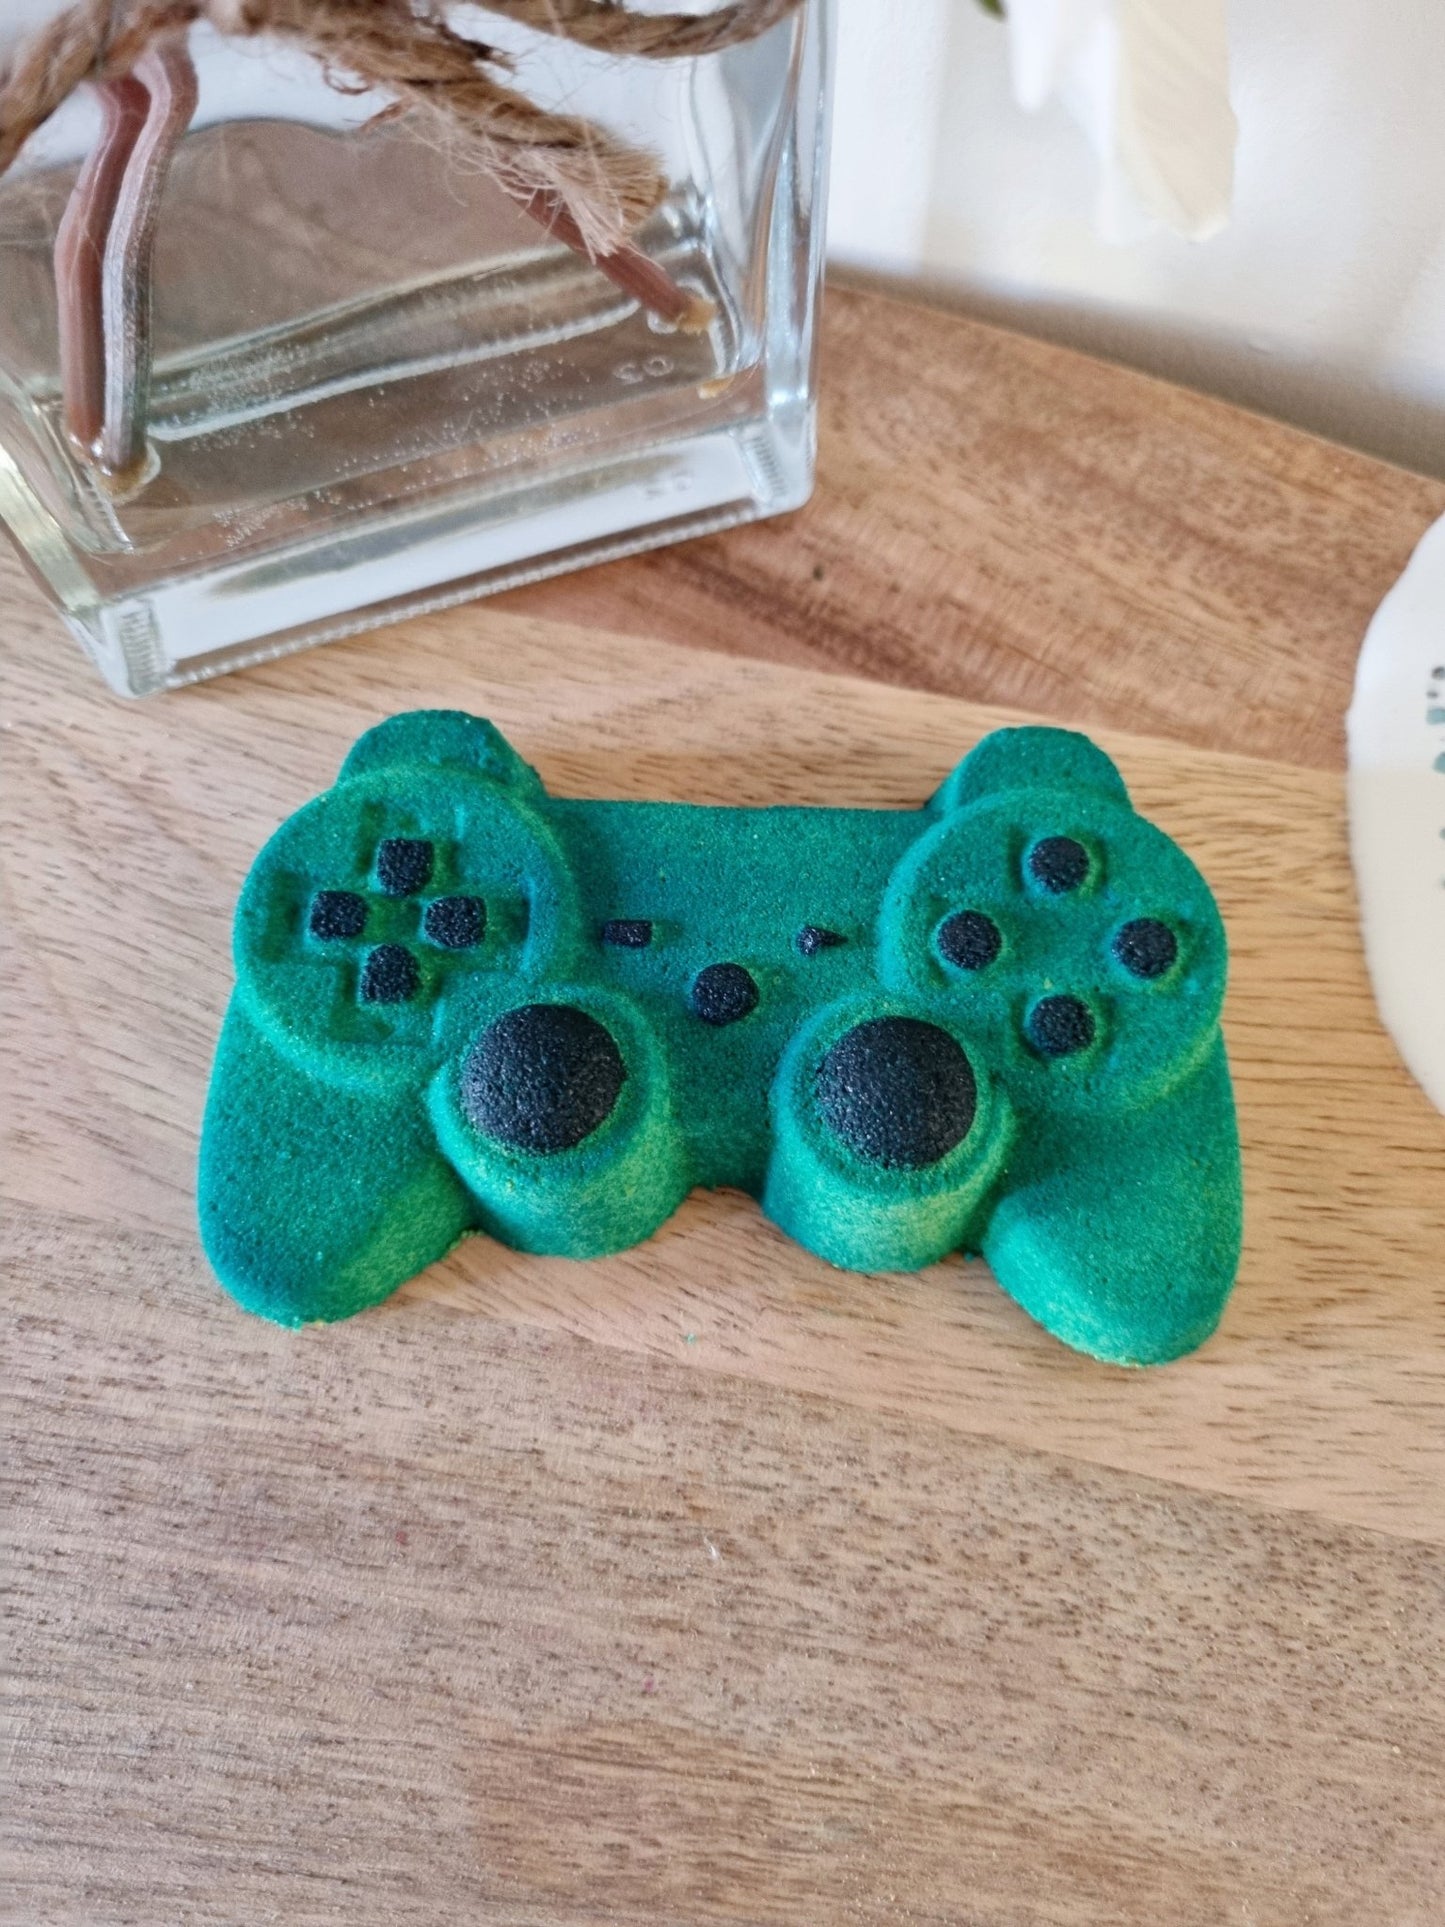 Game Controller Bath Bomb - Bath Bombs - Cottage Fresh Scents